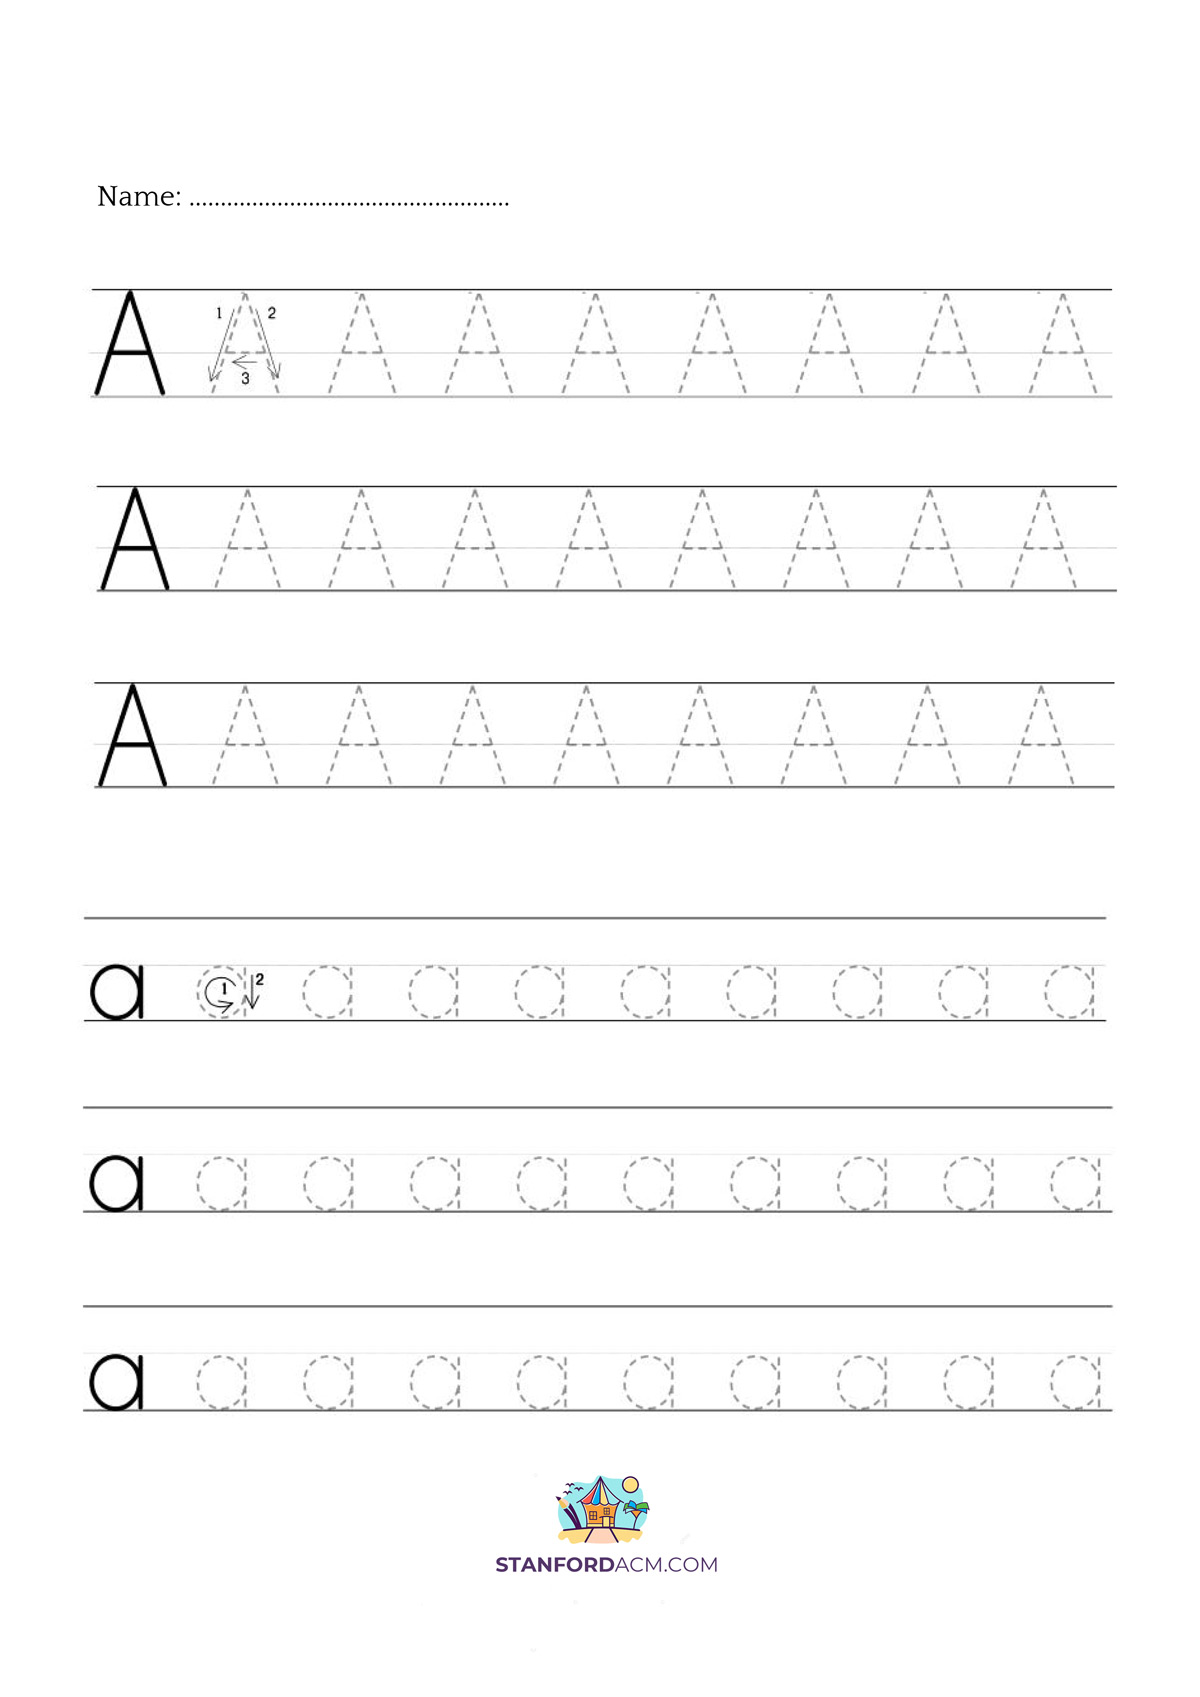 tracing-letters-font-free-download-letter-tracing-worksheets-pdf-download-now-angelo-paul